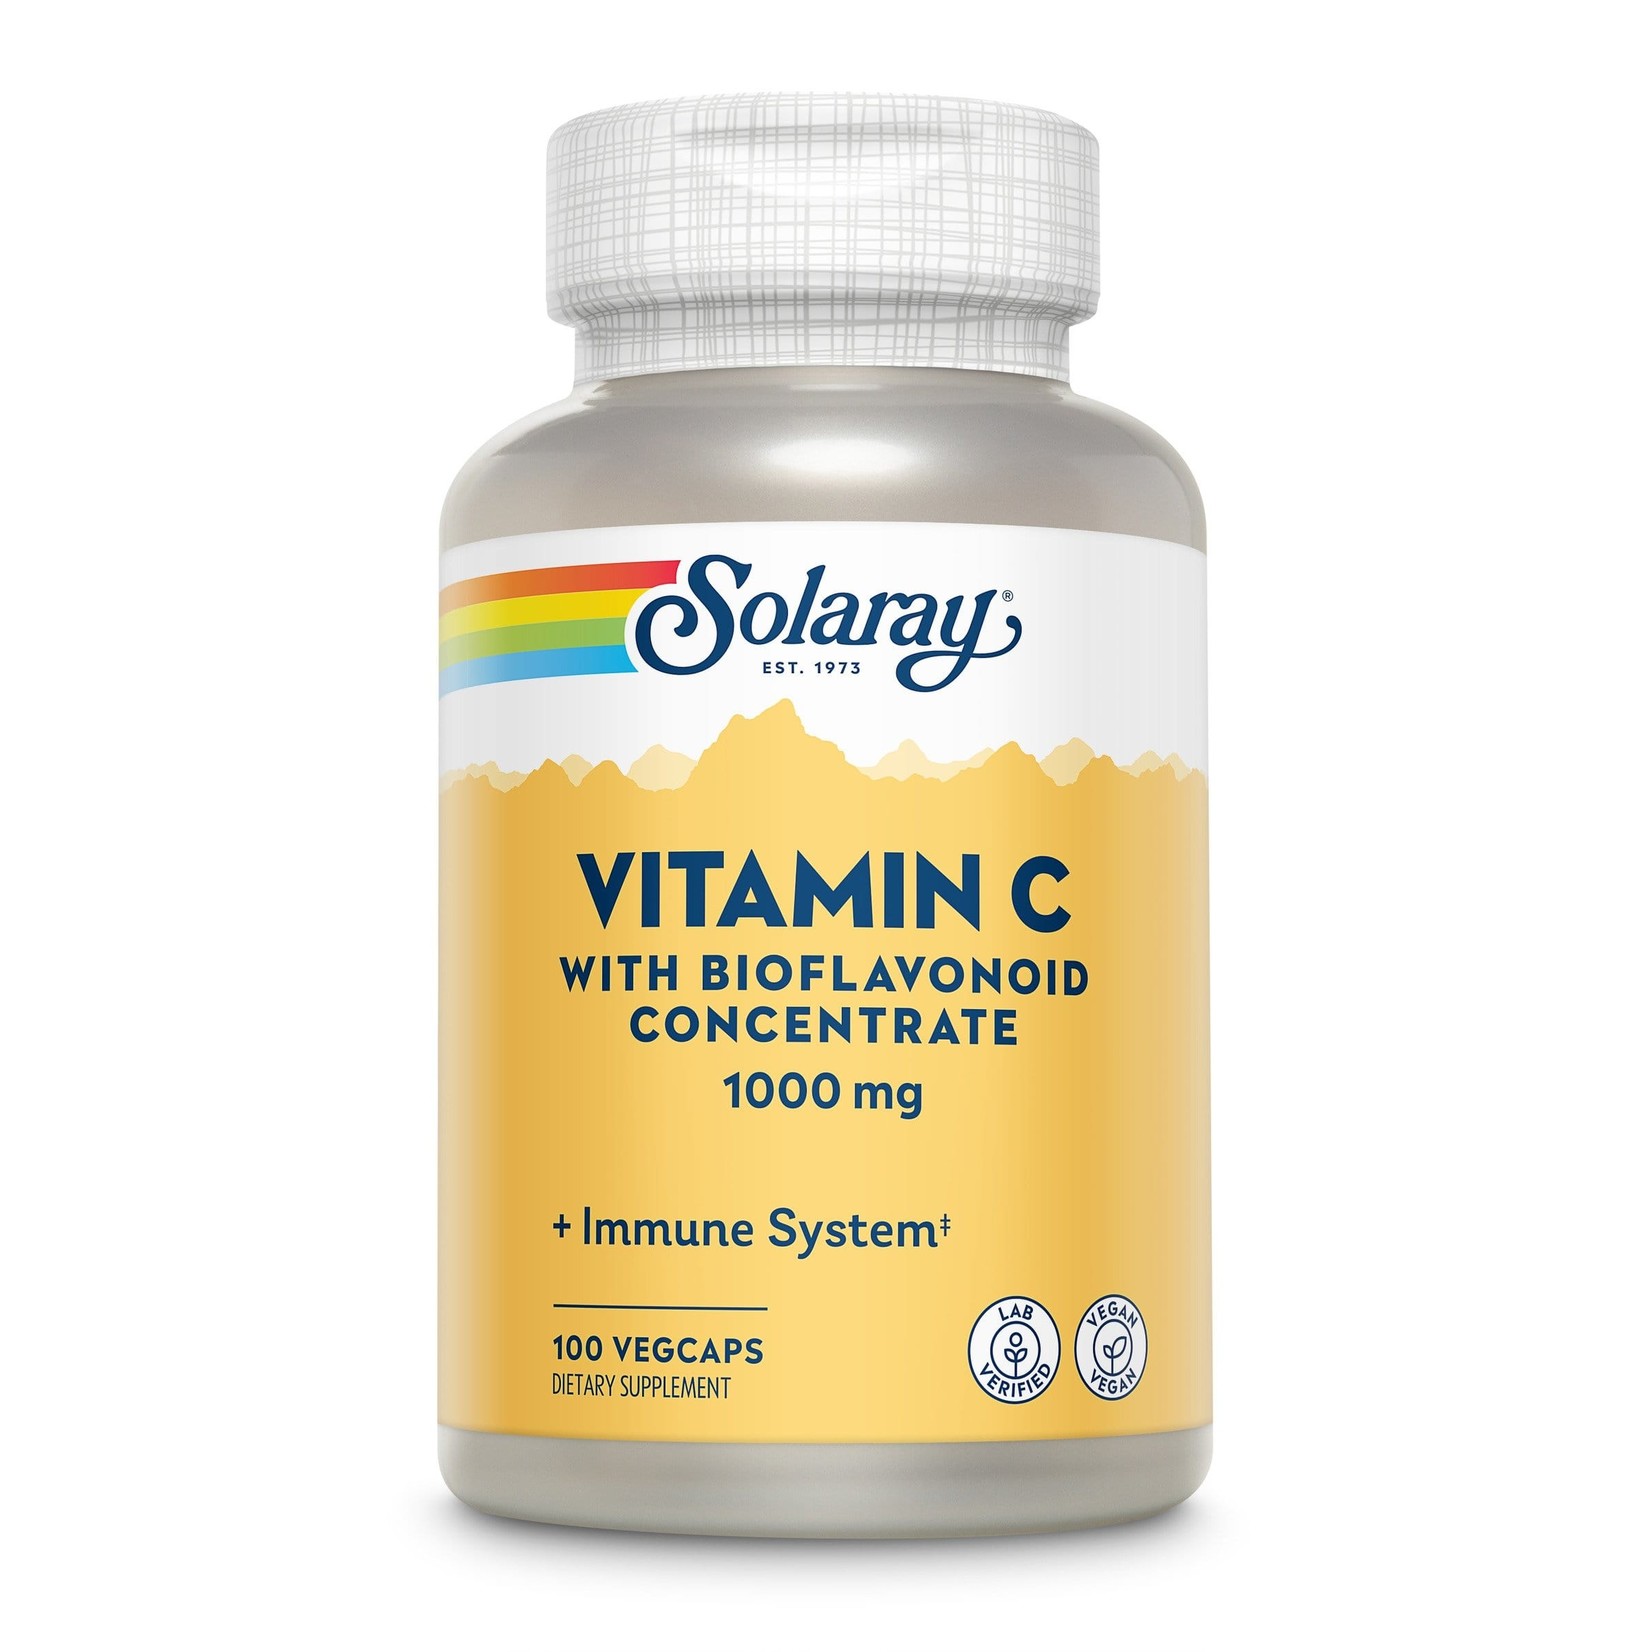 Solaray Solaray - Vitamin C With Bioflavonoid Concentrate 1000 mg - 100 Capsules